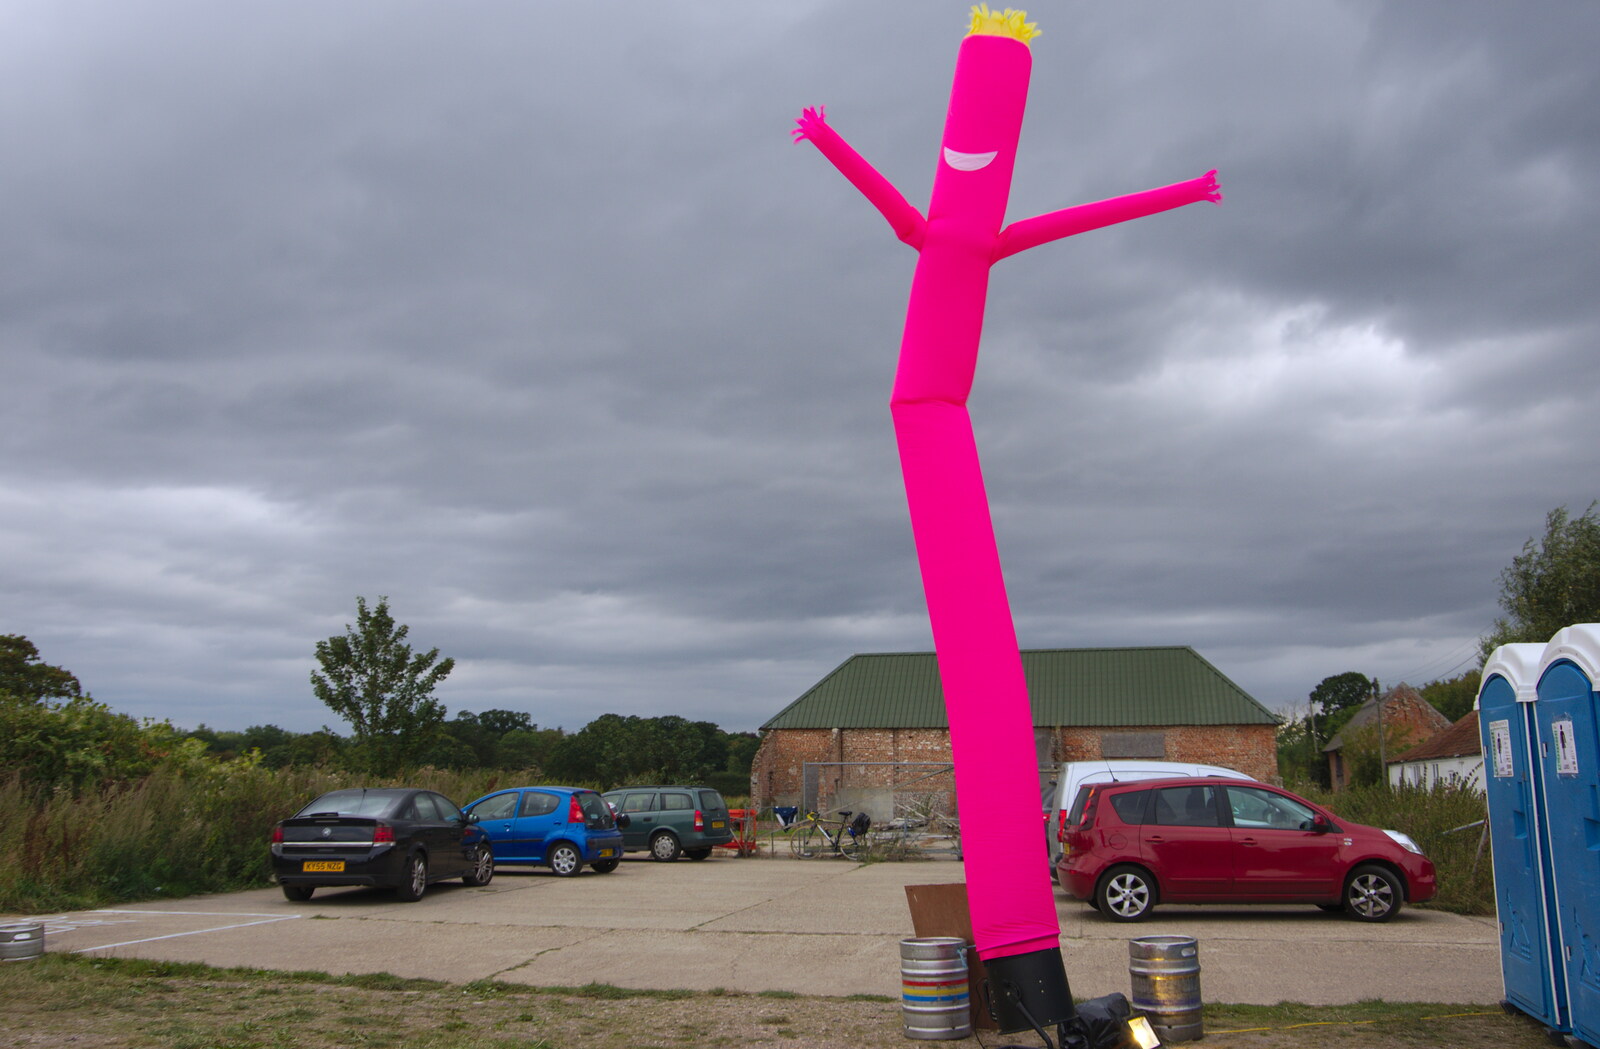 The pink sausage thing keeps dancing from Waxham Sands and the Nelson Head Beer Festival, Horsey, Norfolk - 31st August 2019